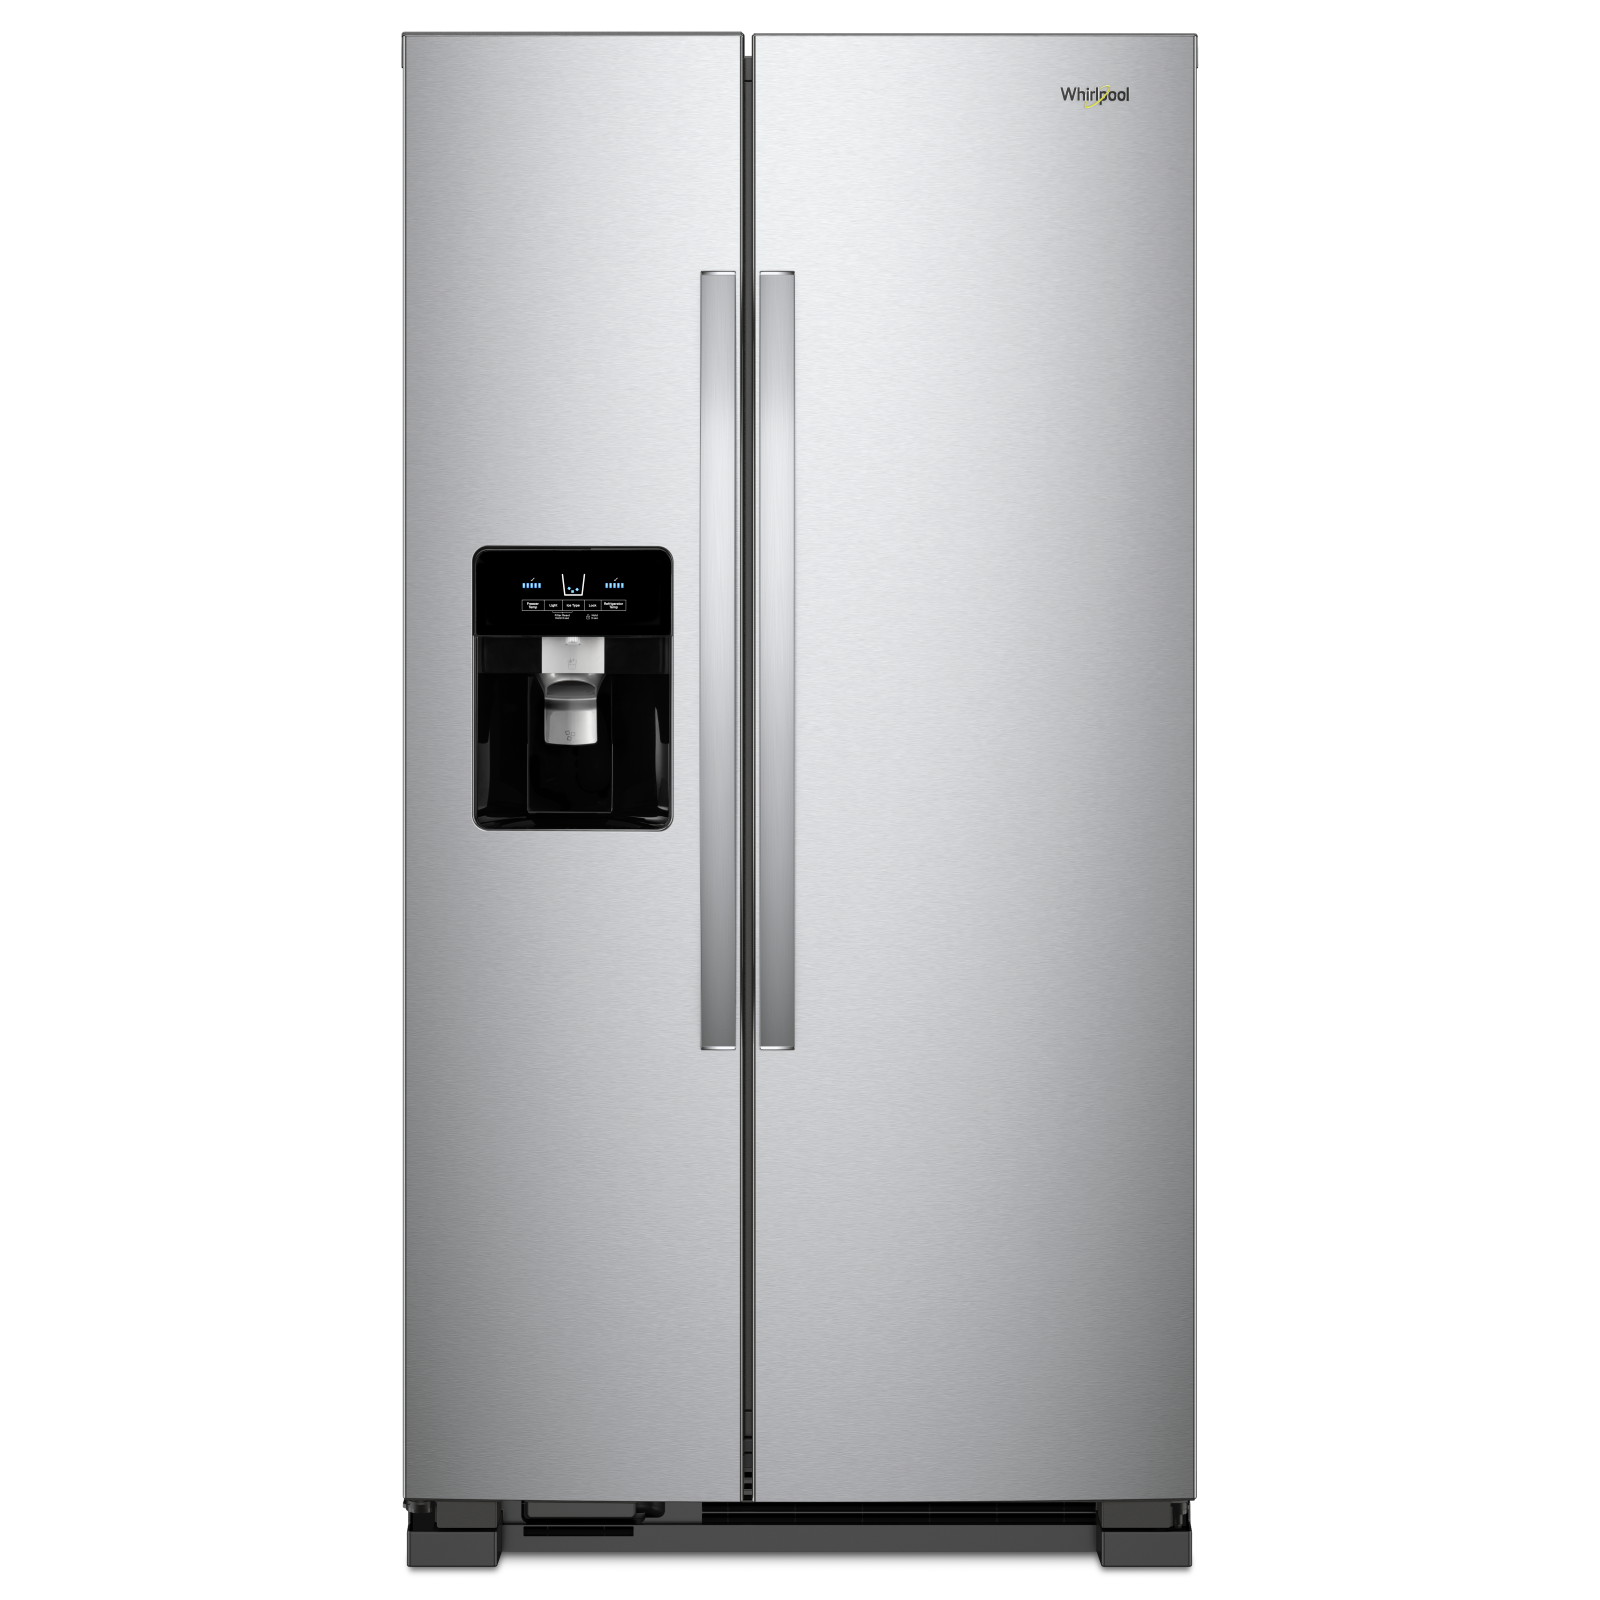 Whirlpool - 32.75 Inch 21 cu. ft Side by Side Refrigerator in Stainless - WRS331SDHM